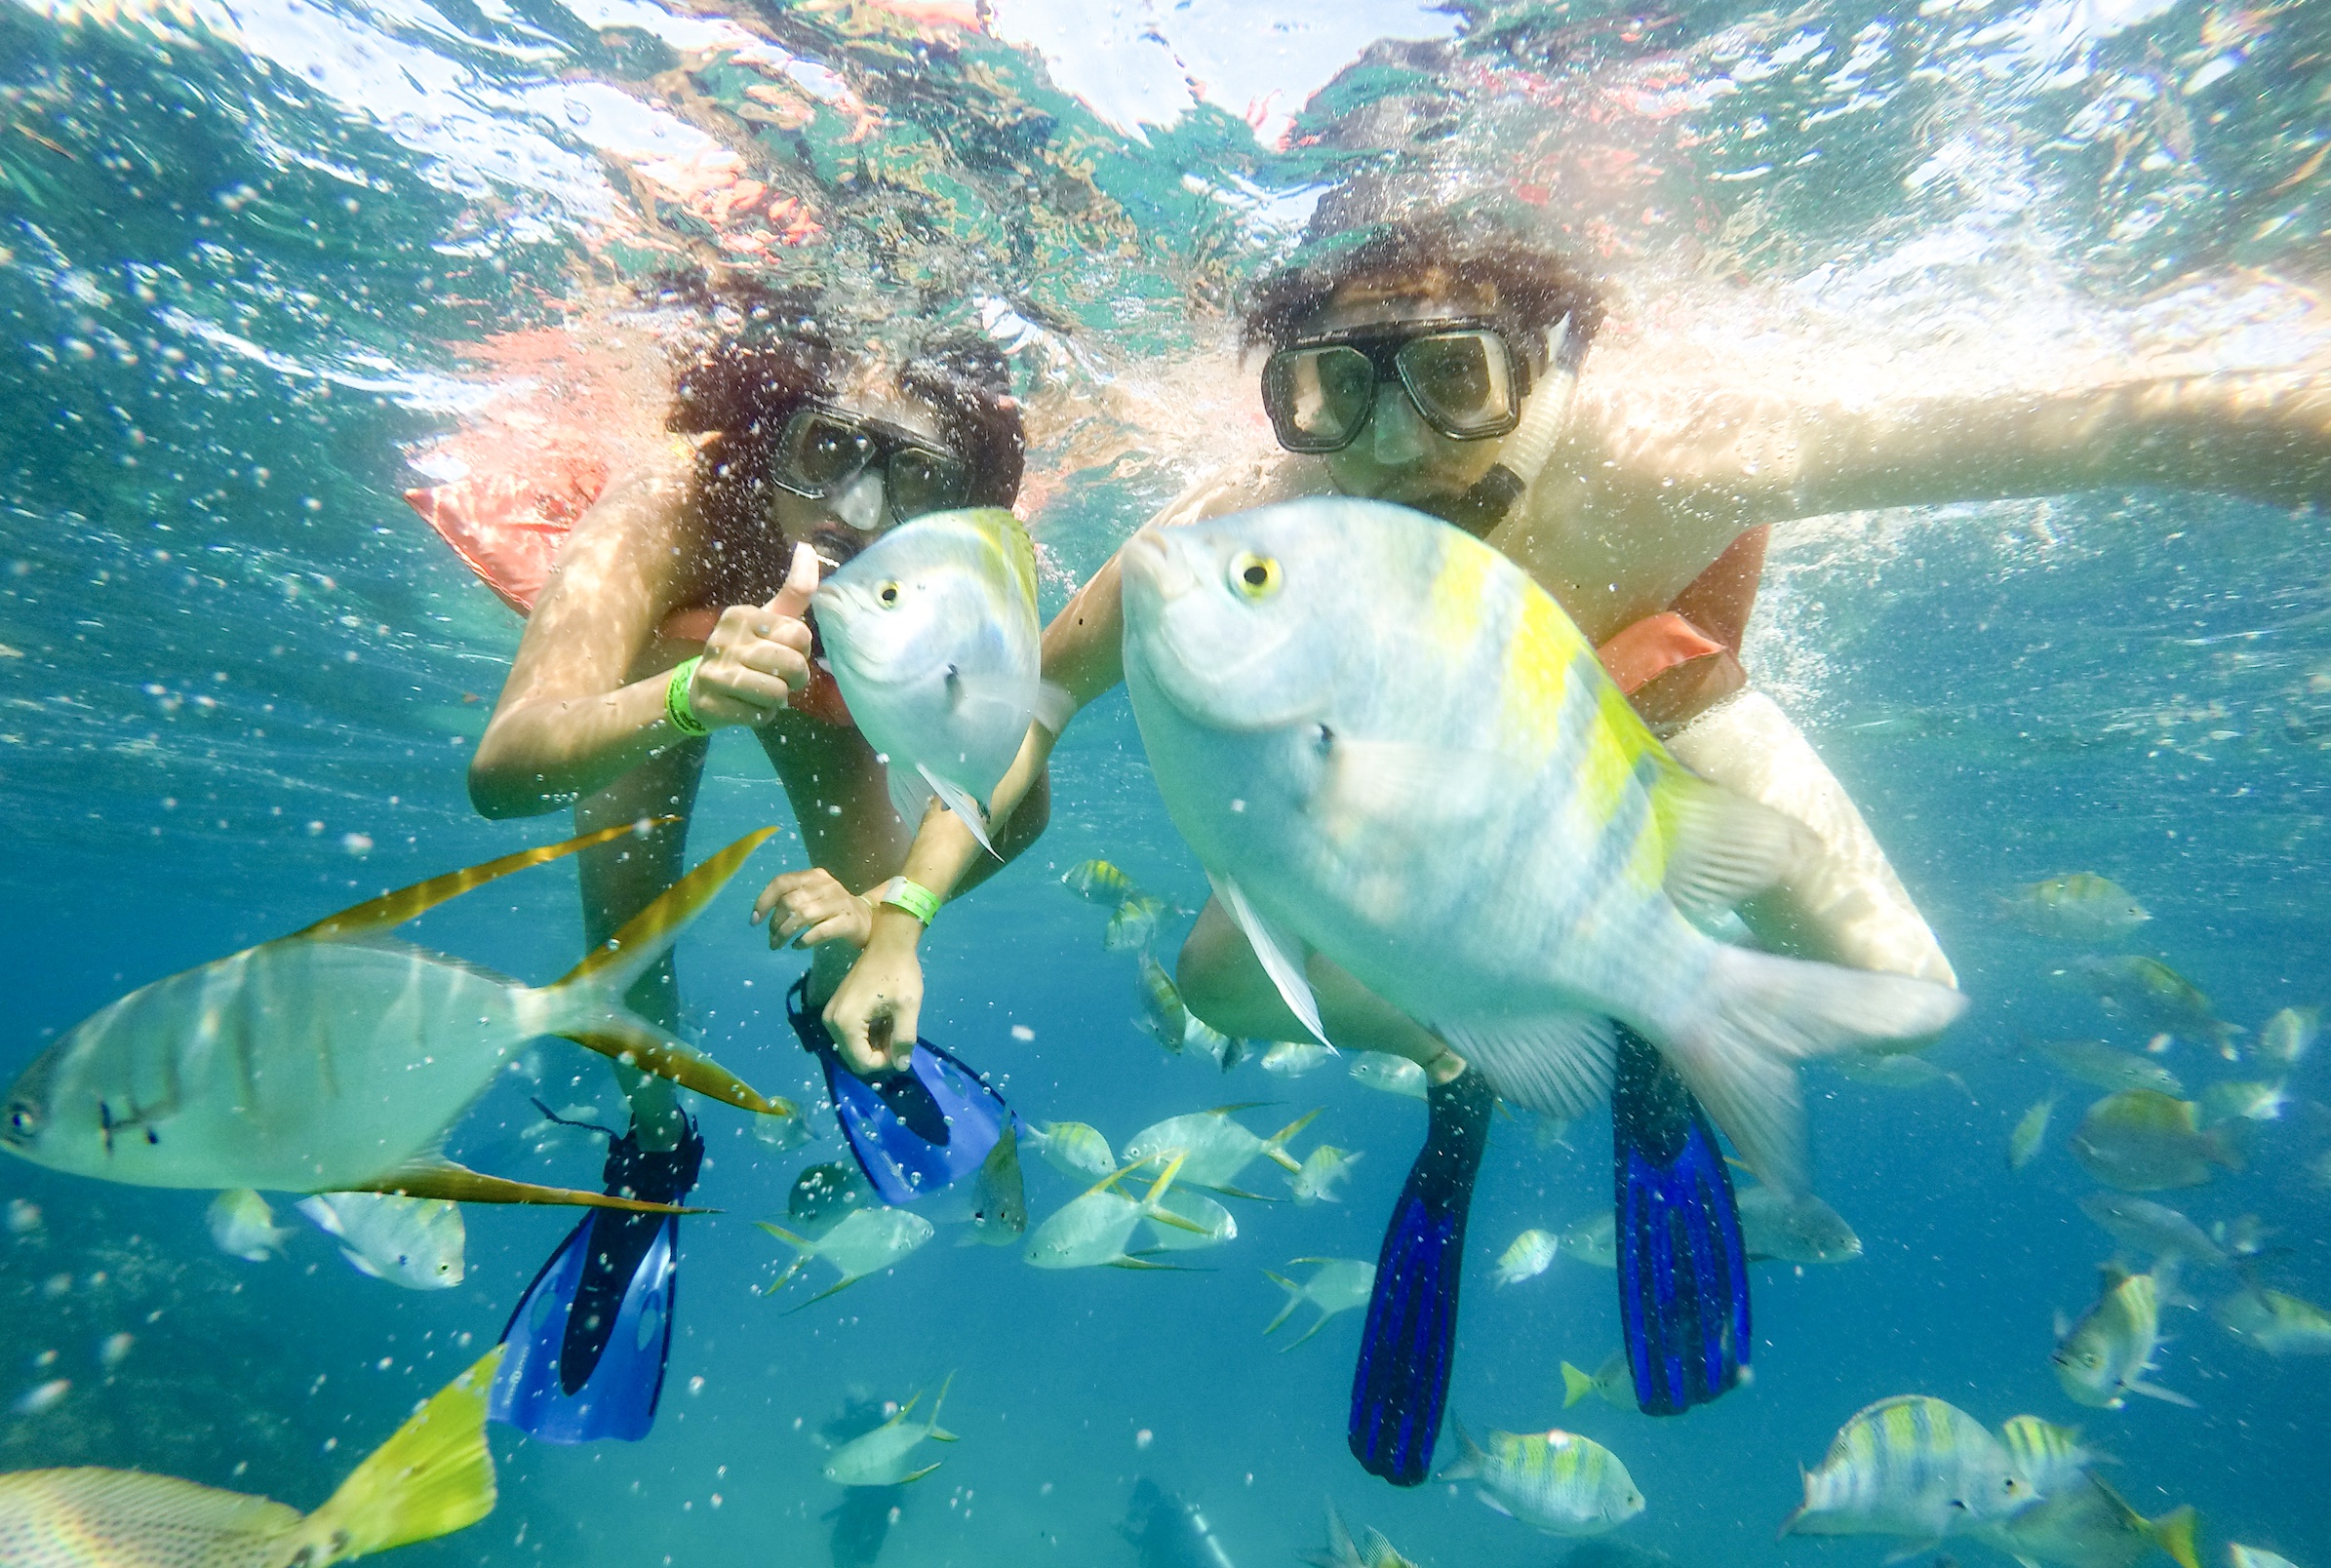 Cabo Snorkeling Tours